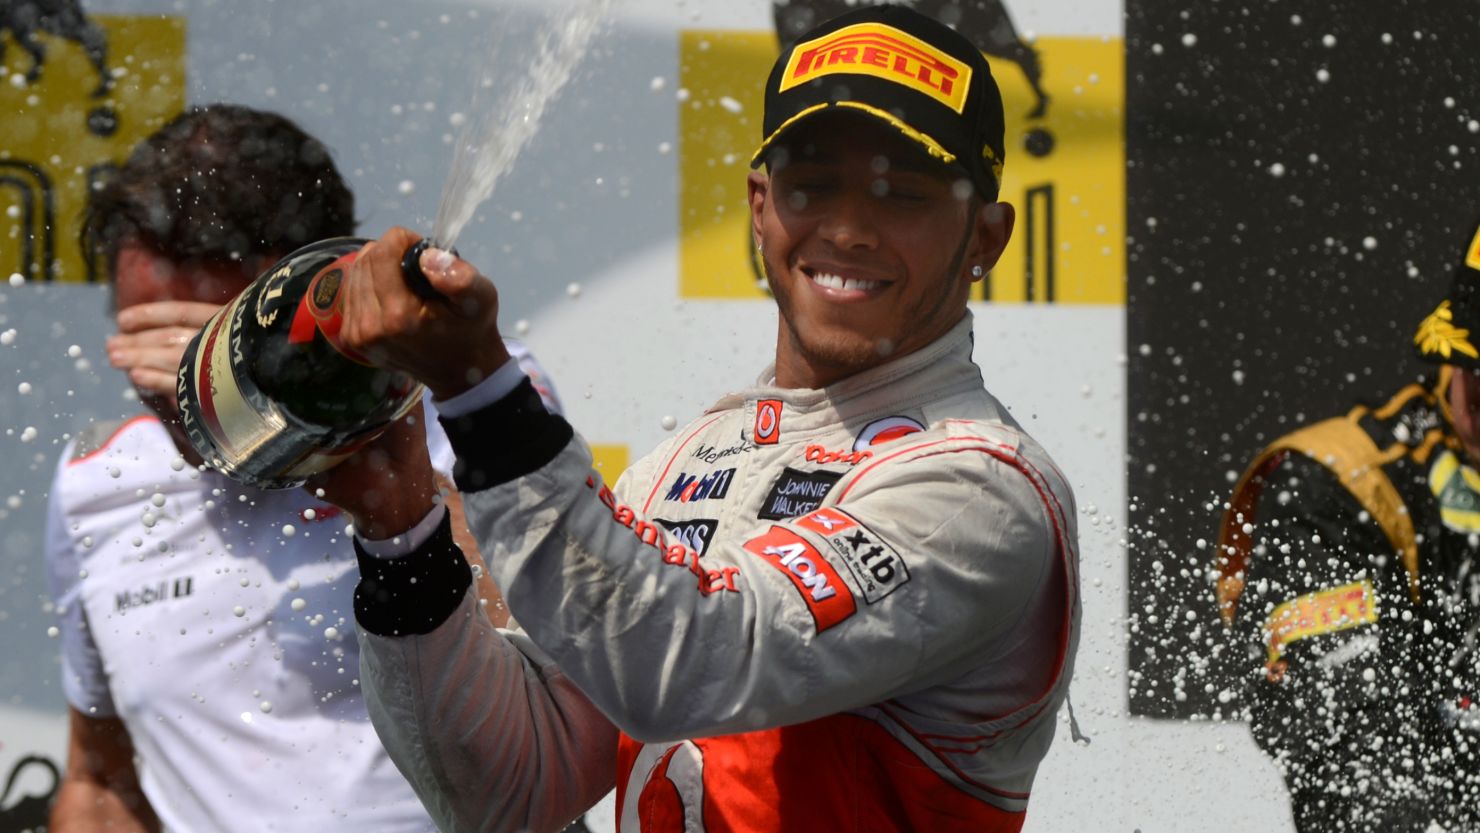 Lewis Hamilton celebrates his superb victory in the Hungary Grand Prix in traditional style. 